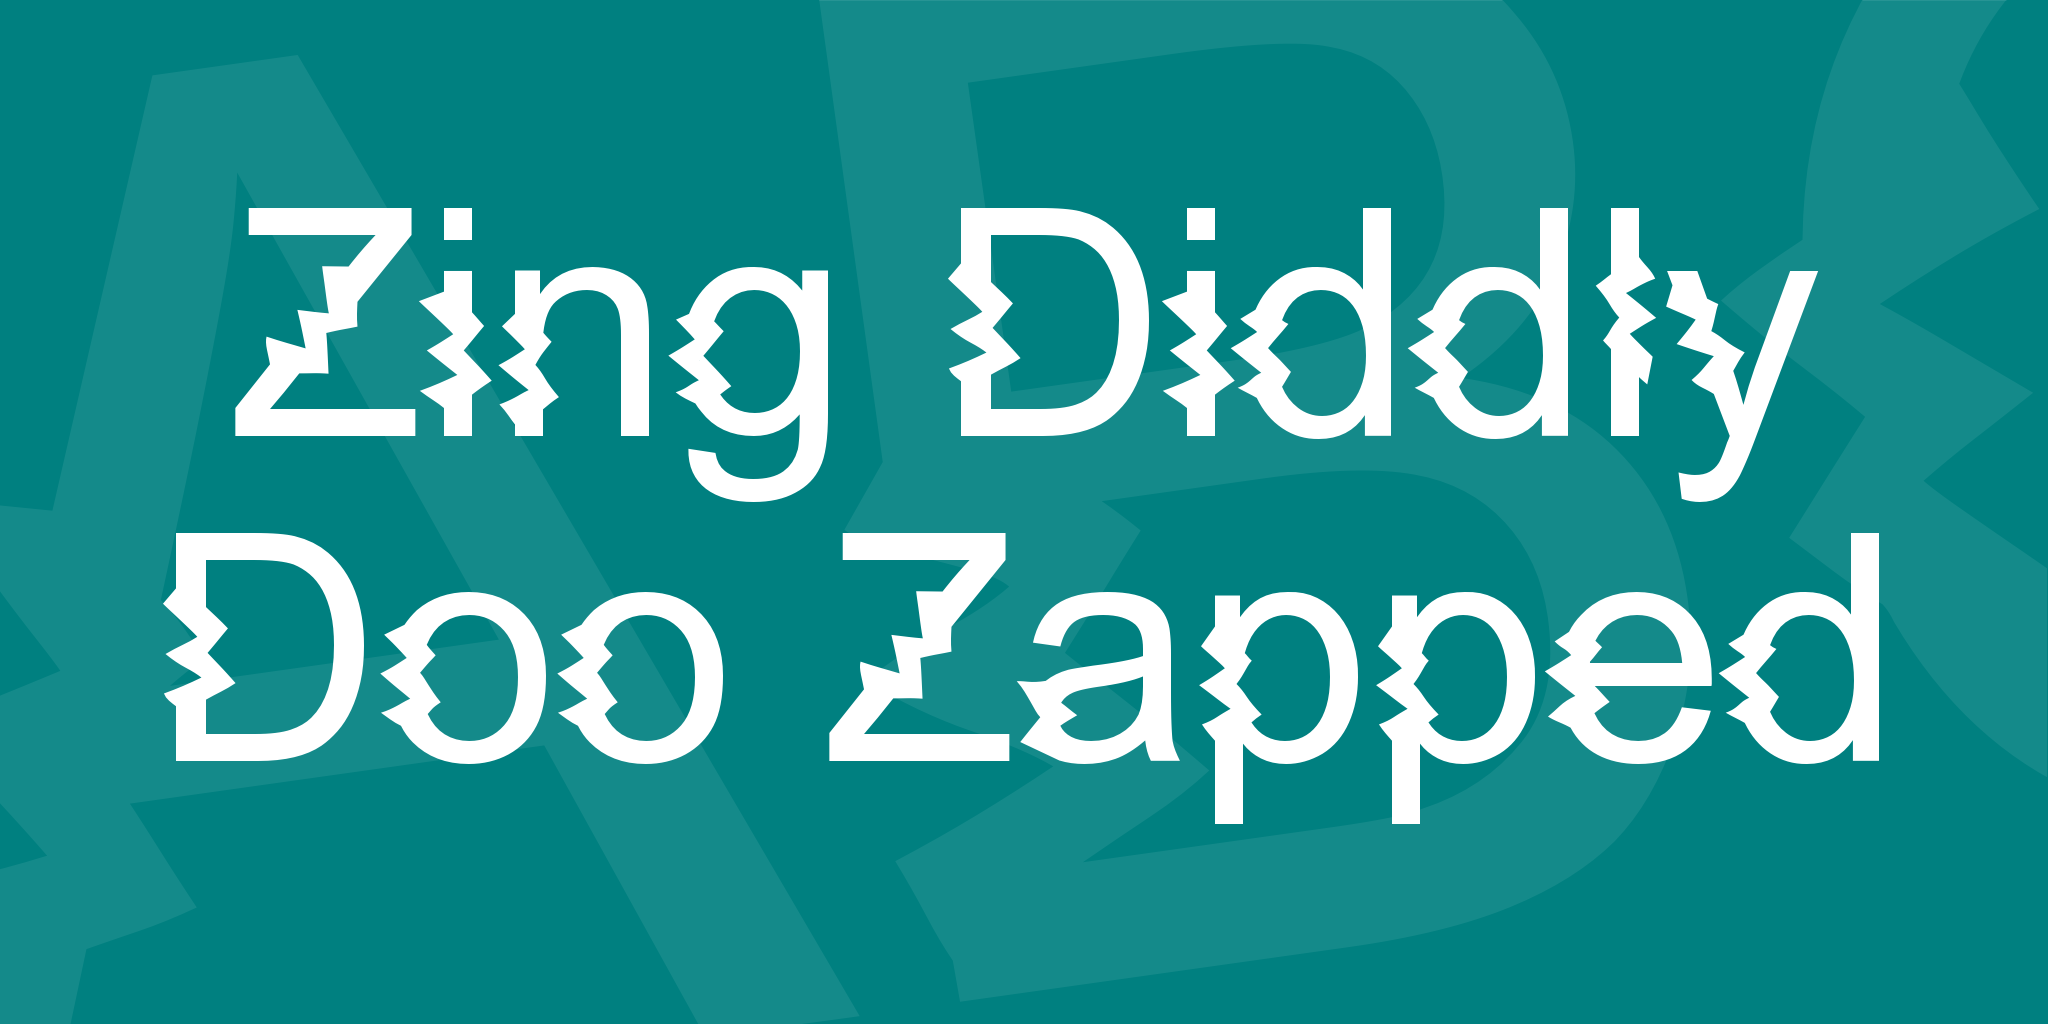 Zing Diddly Doo Zapped